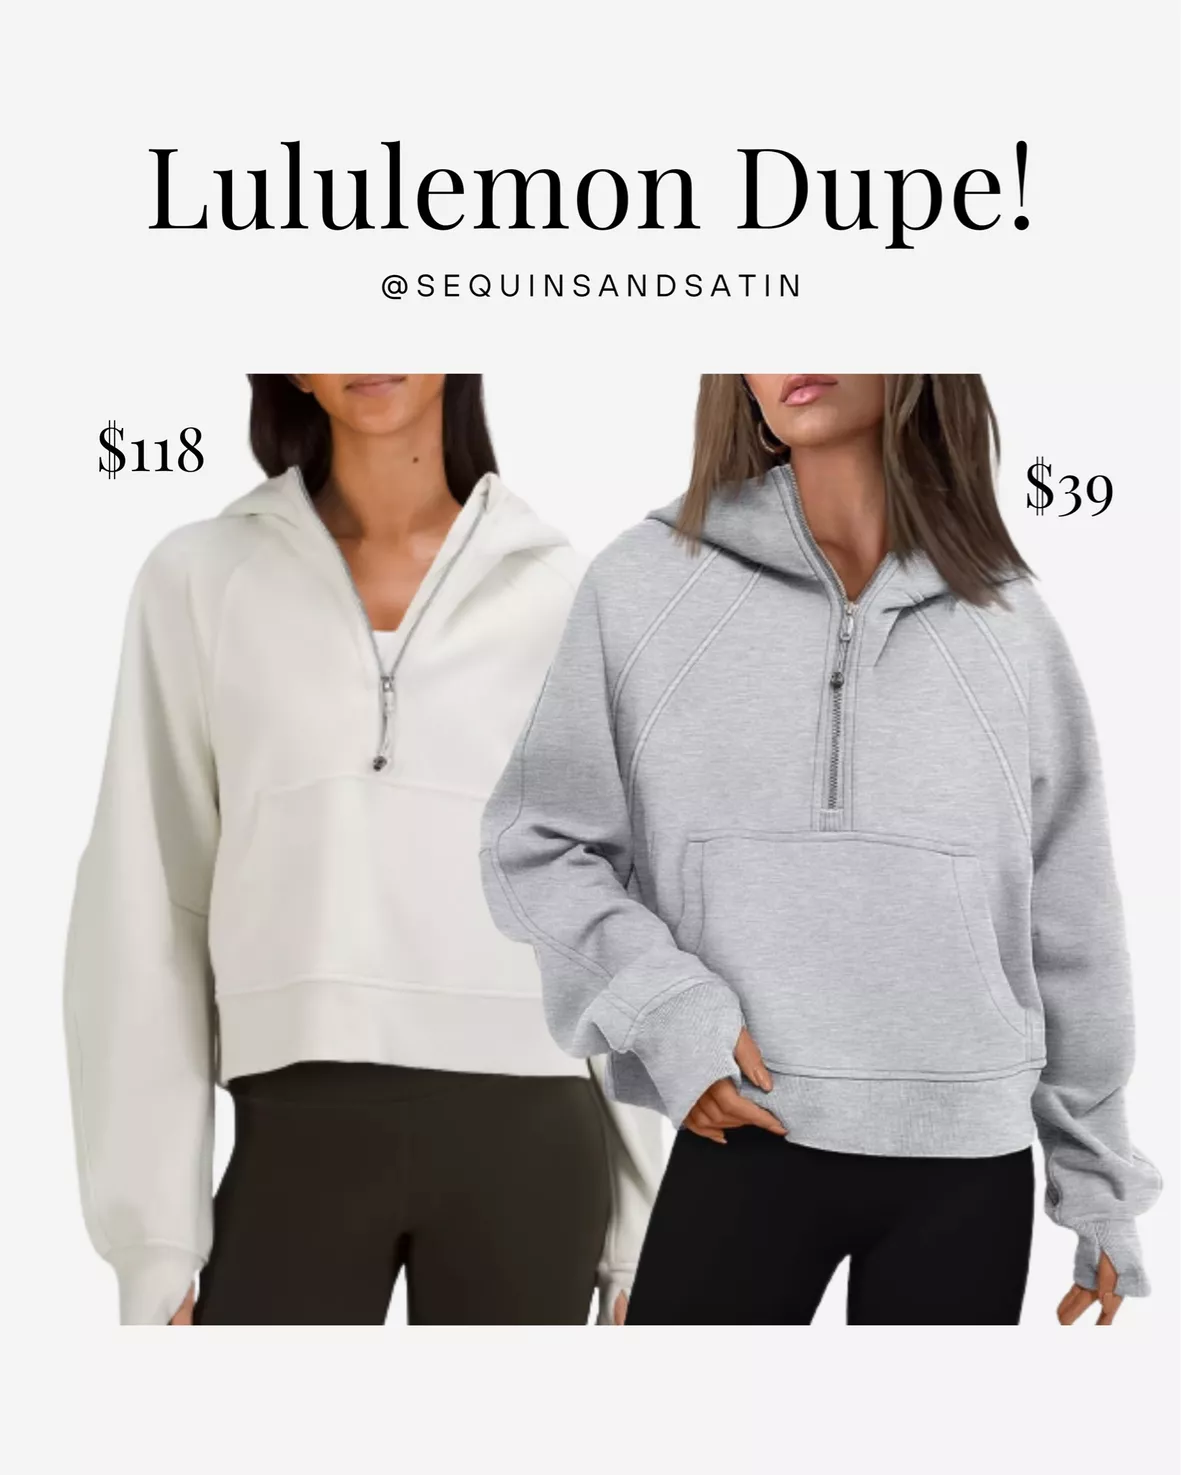 This is now the 4th lulu dupe scuba hoodie I own! I love this dupe so